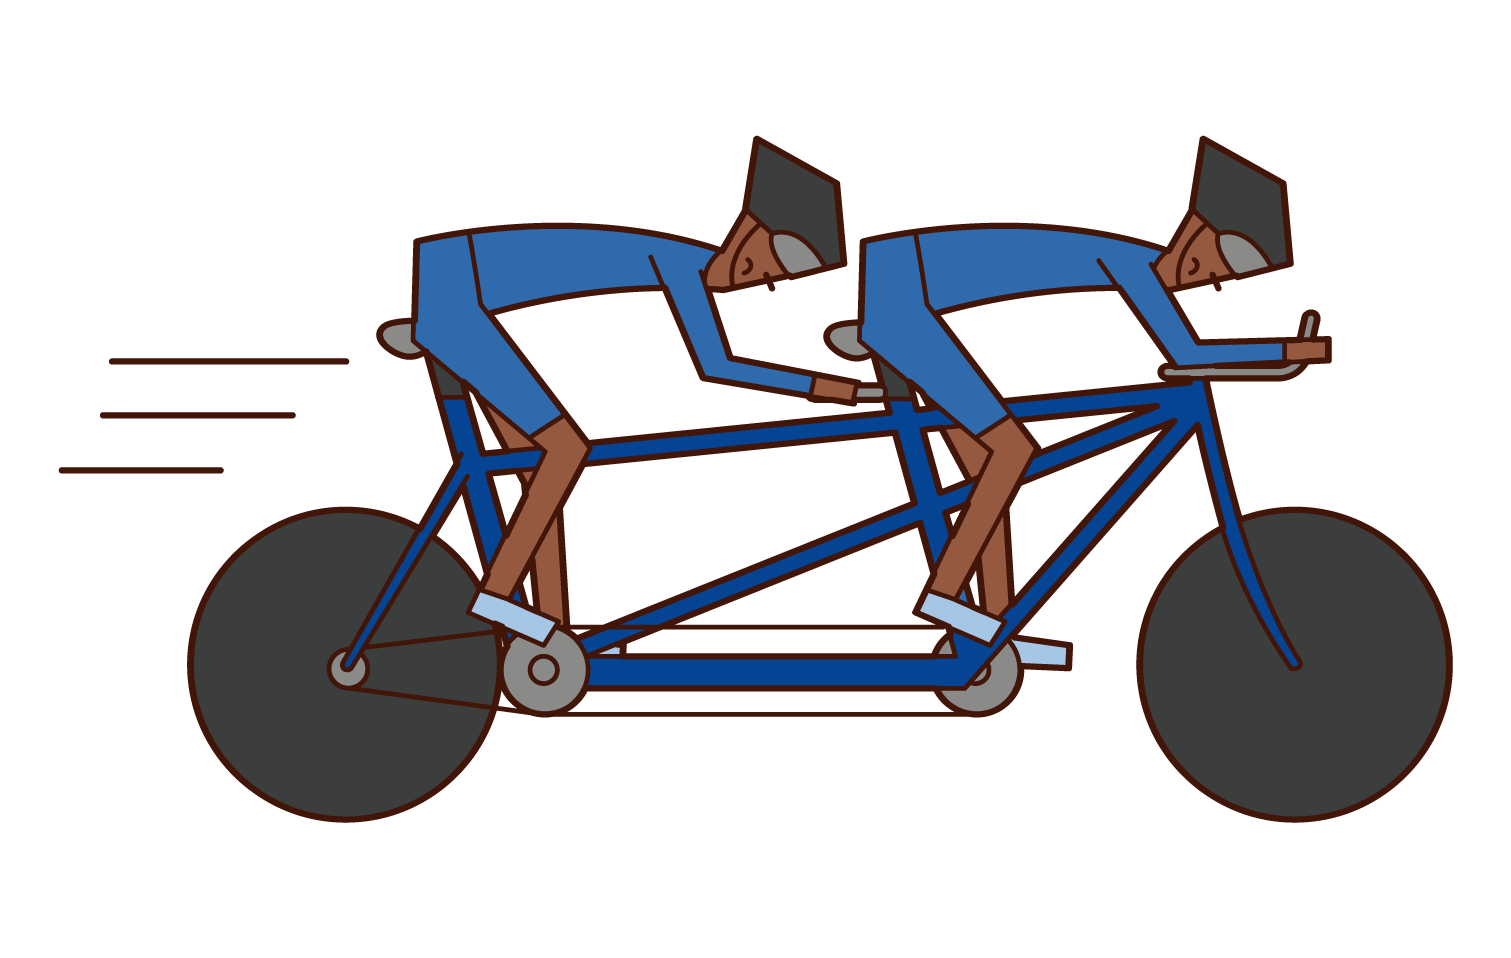 Illustration of Paralympic cyclists (men riding tandem bicycles)